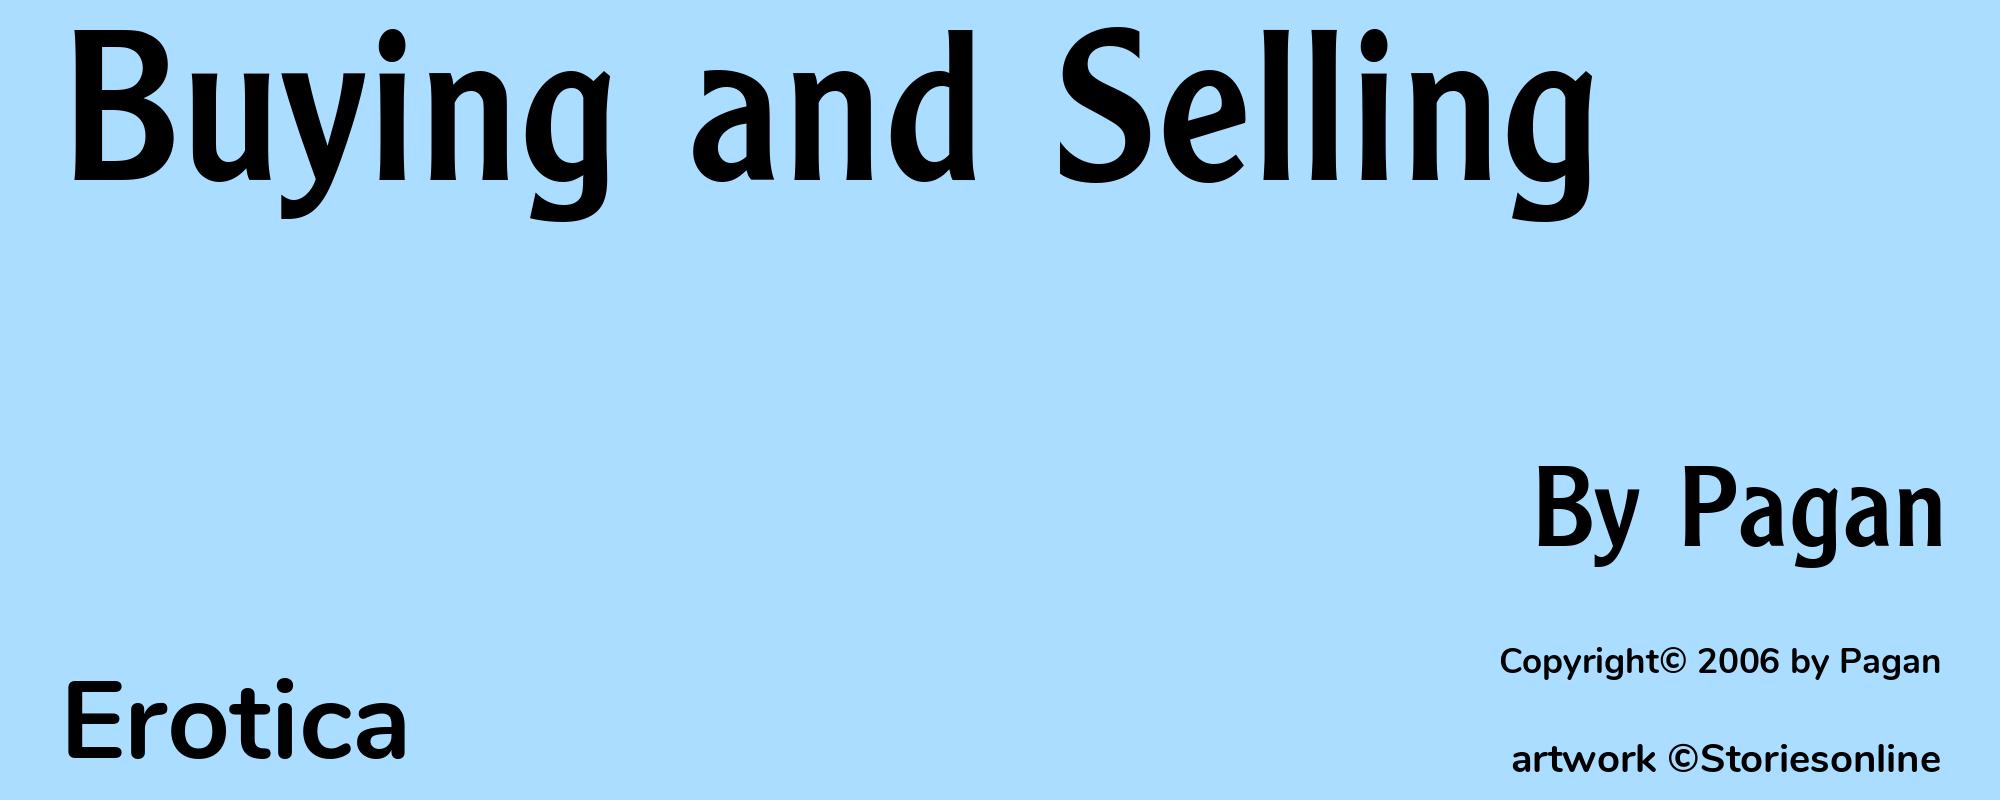 Buying and Selling - Cover